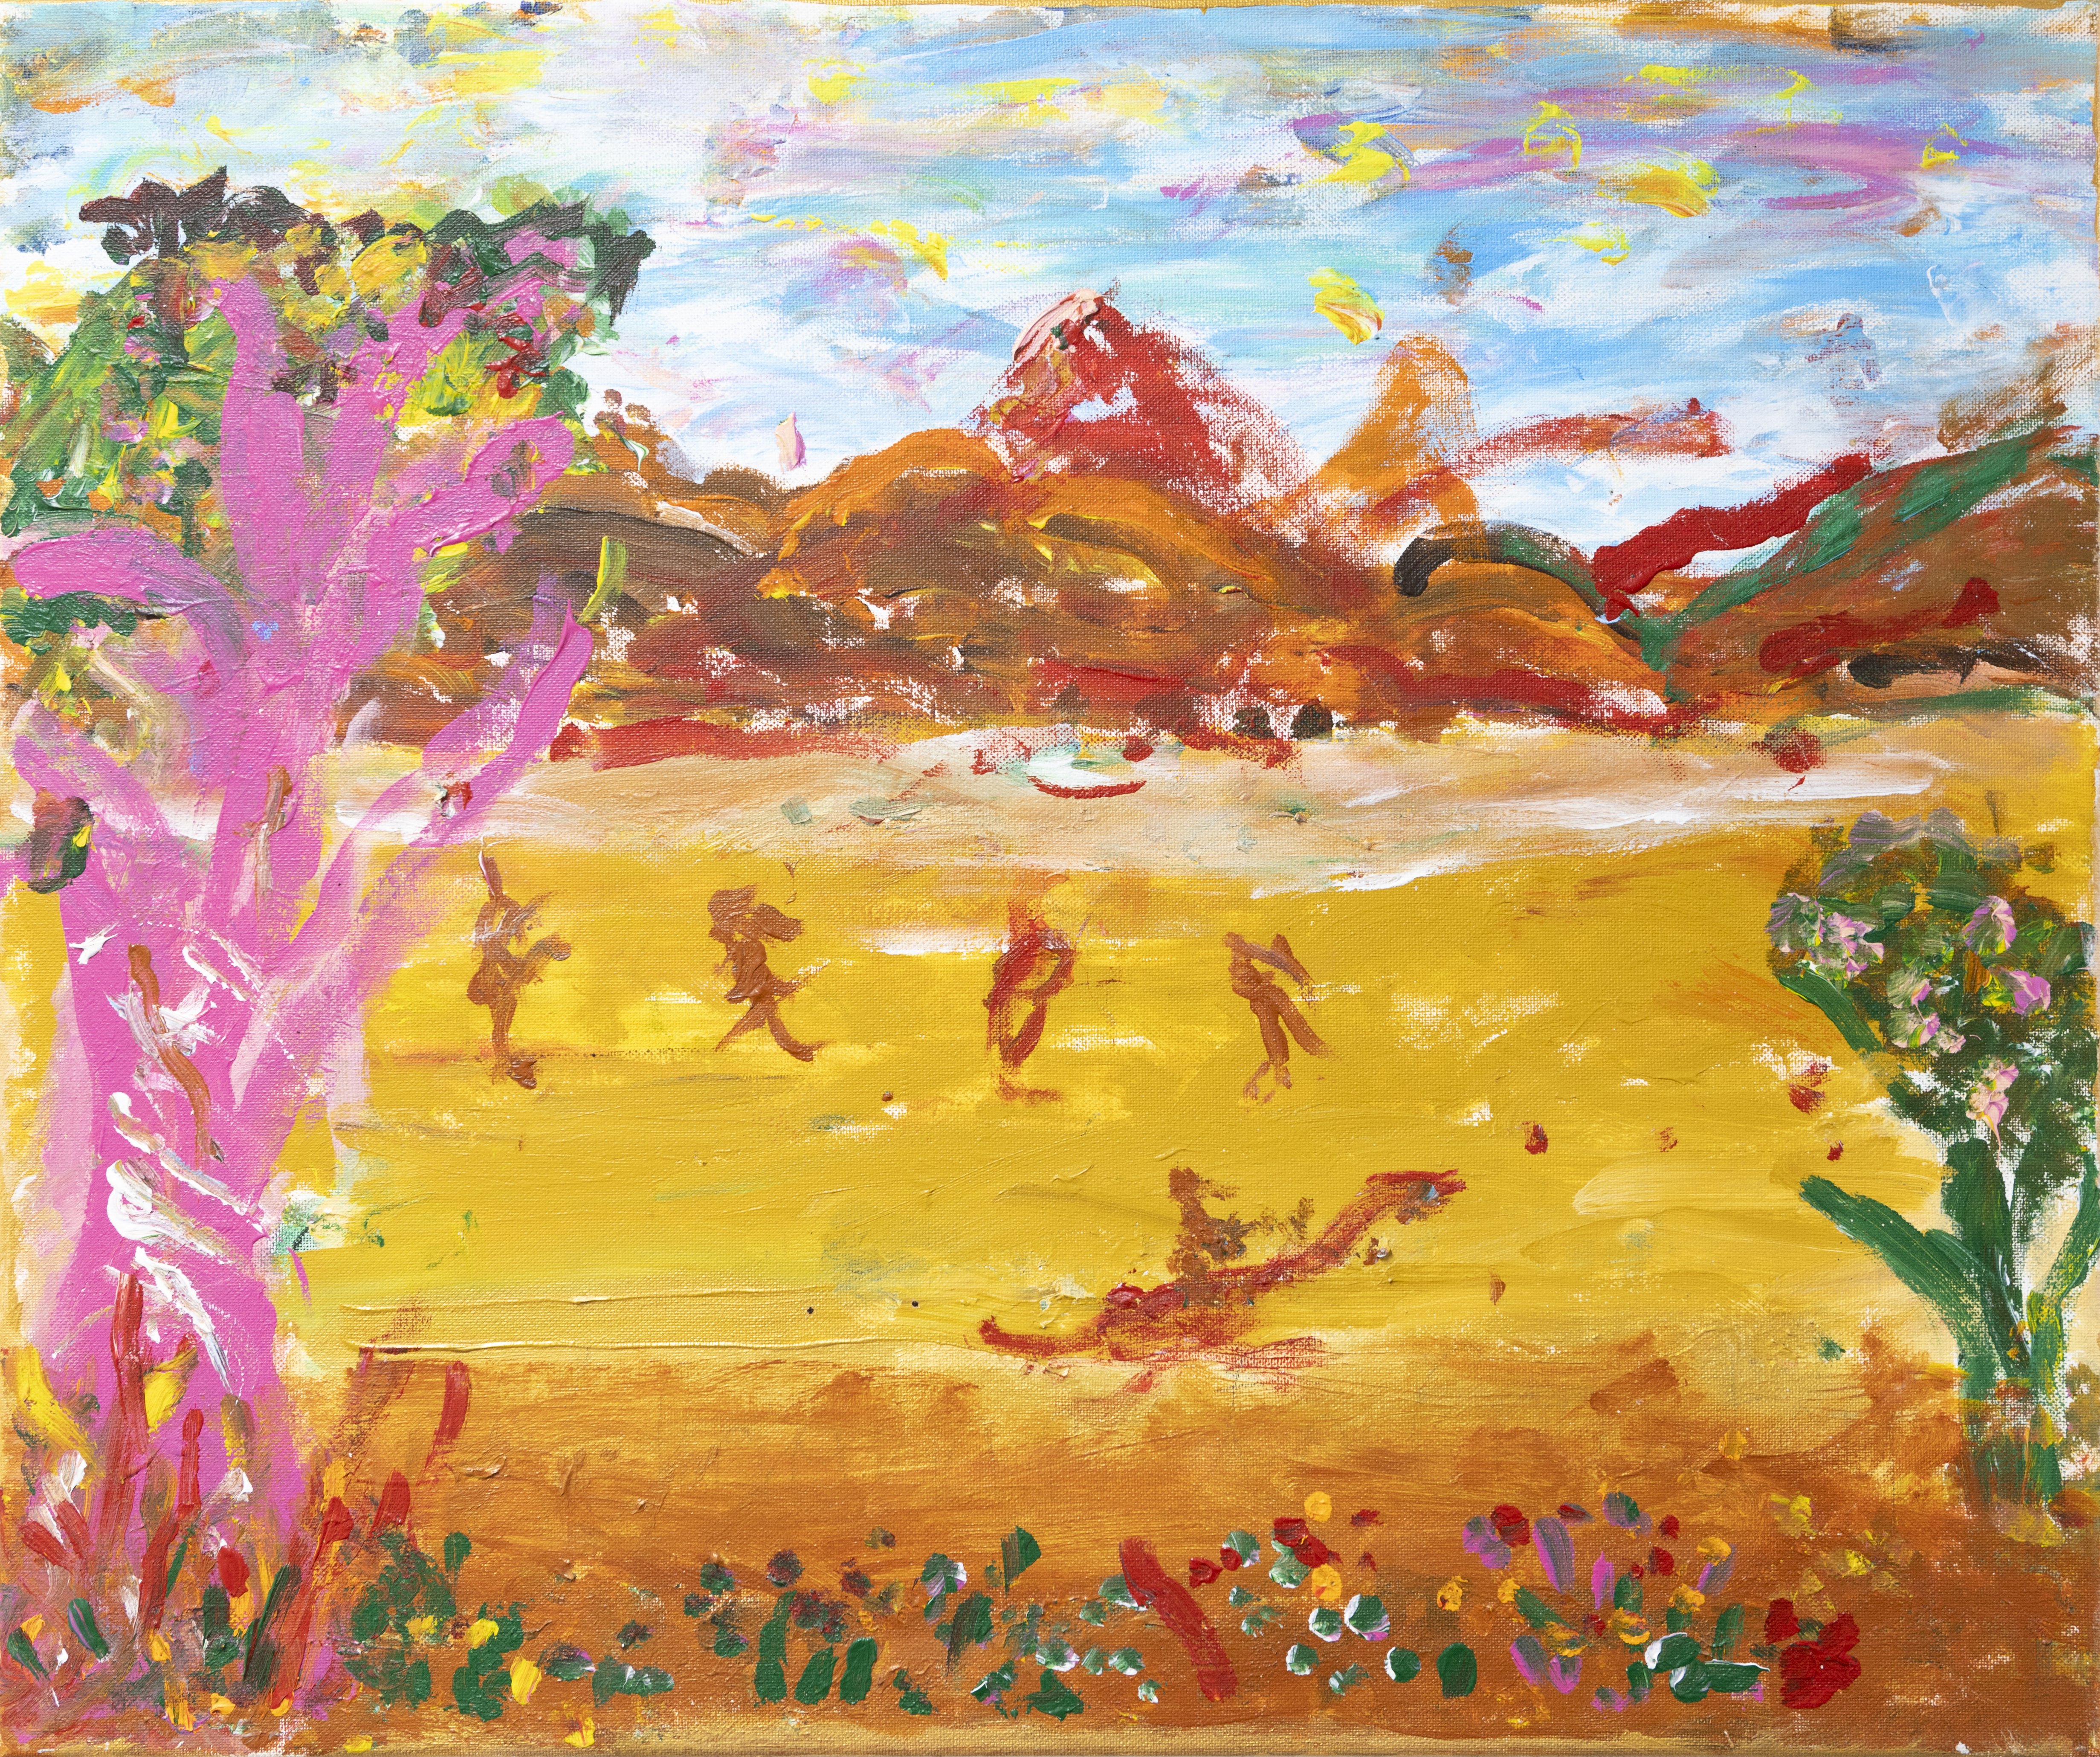 This landscape painting is made up of desert yellows and the red earth of Central and Western Australia. There is a frenzy of activity in this otherwise sparse environment, kangaroos dashing across the plains and cowboys on horseback. In the foreground is the pink and green trunks of trees. In the background, the towering rock formations of sacred places.